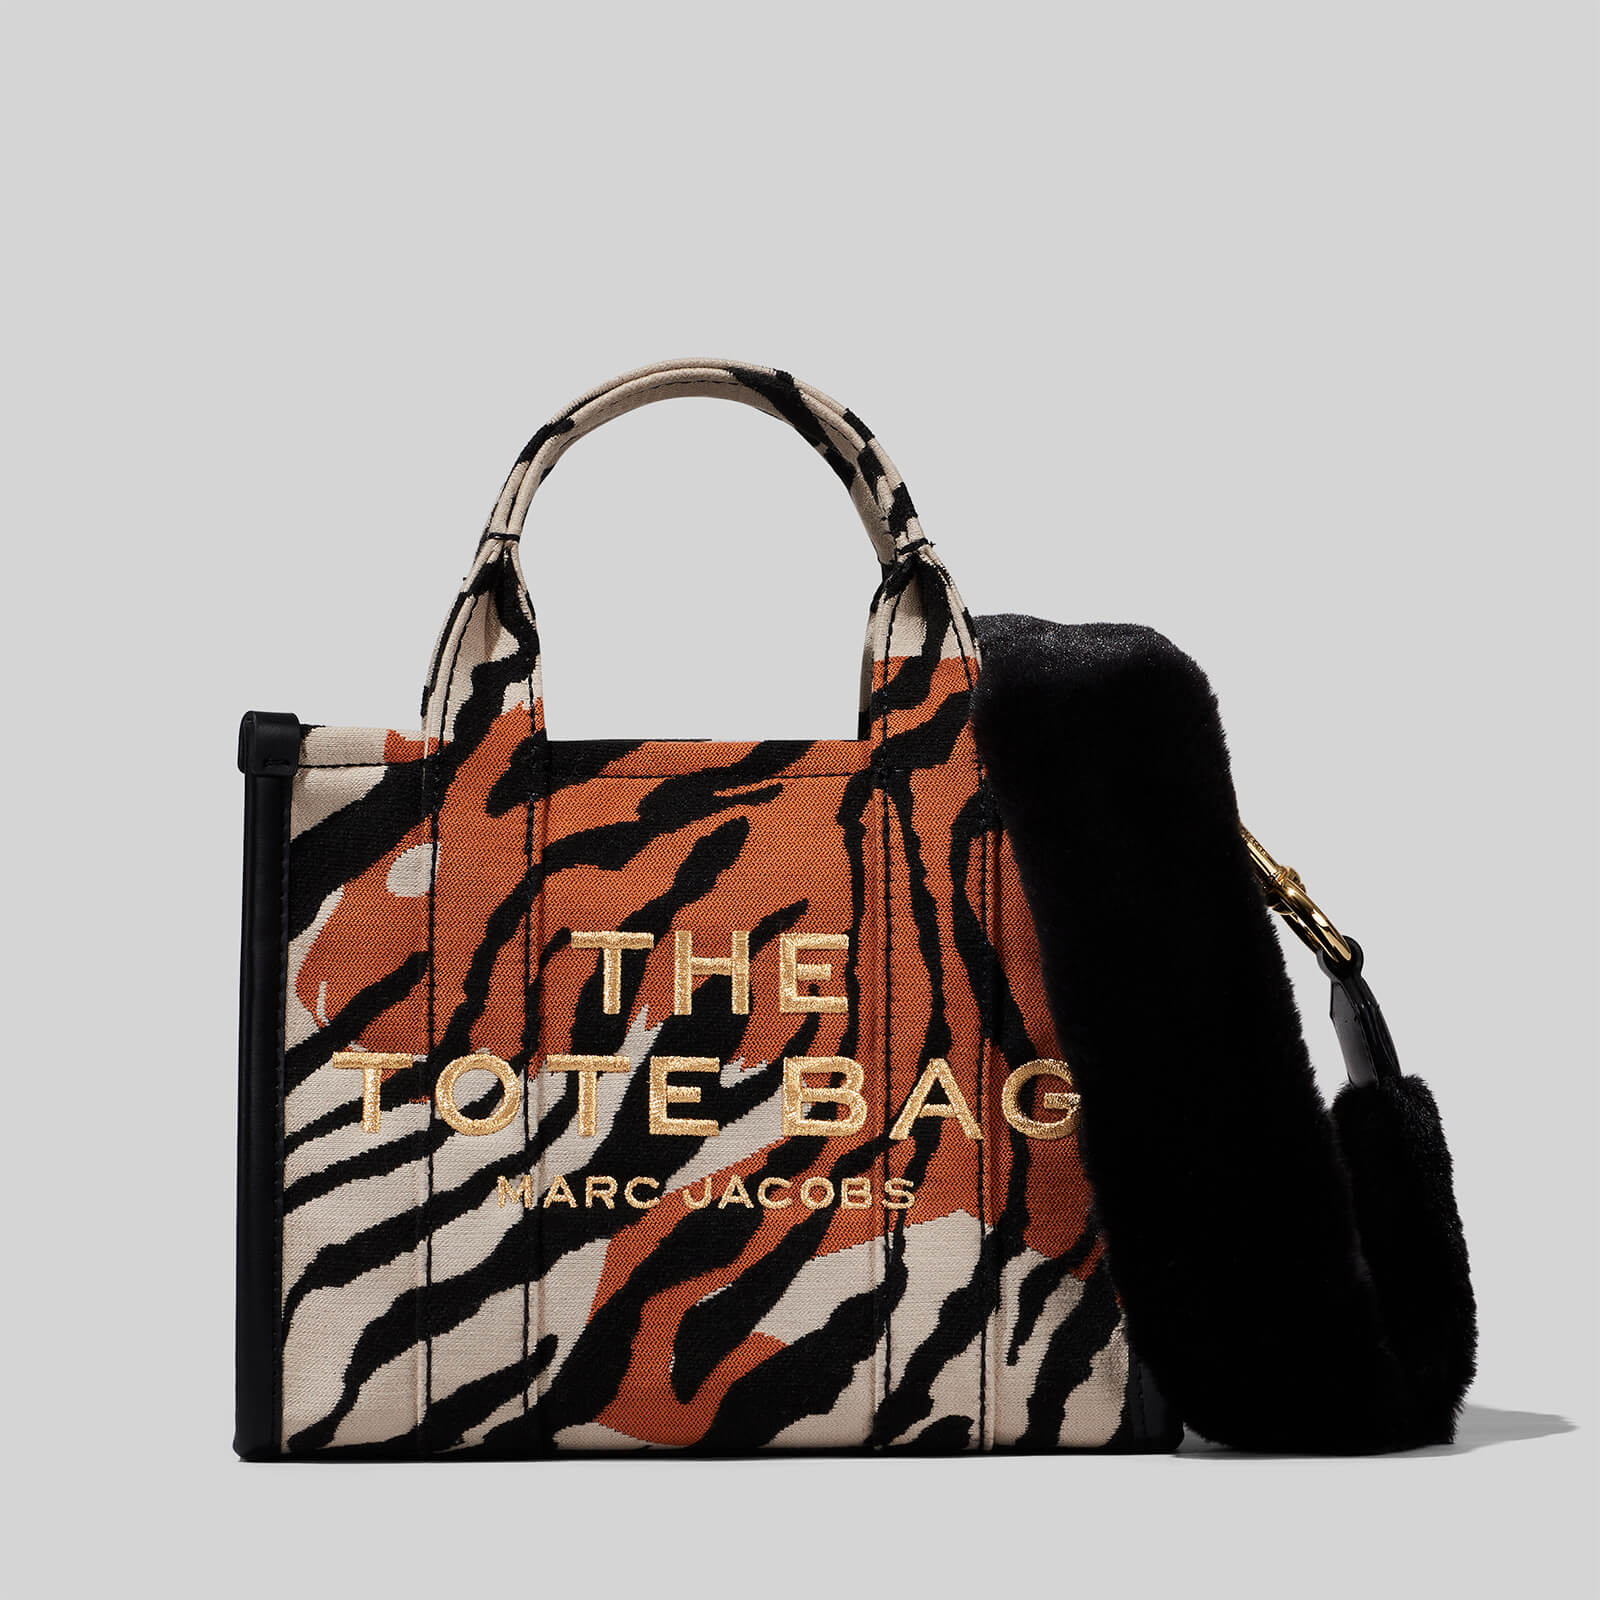 Marc Jacobs Women's The Year Of The Tiger Tote Bag - Beige Multi